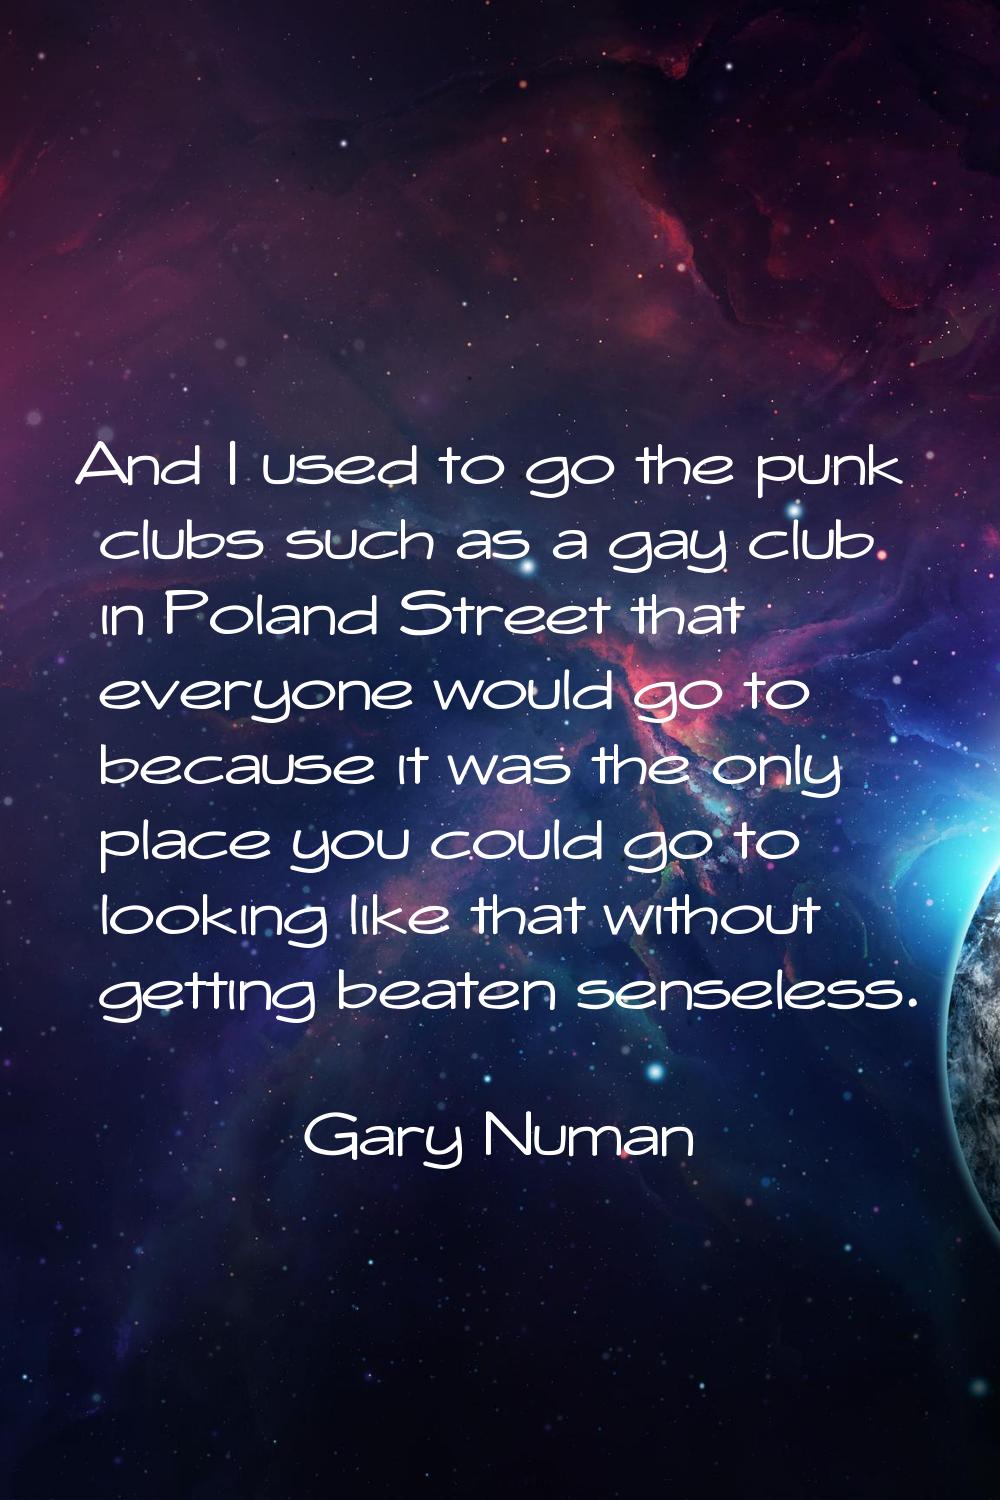 And I used to go the punk clubs such as a gay club in Poland Street that everyone would go to becau